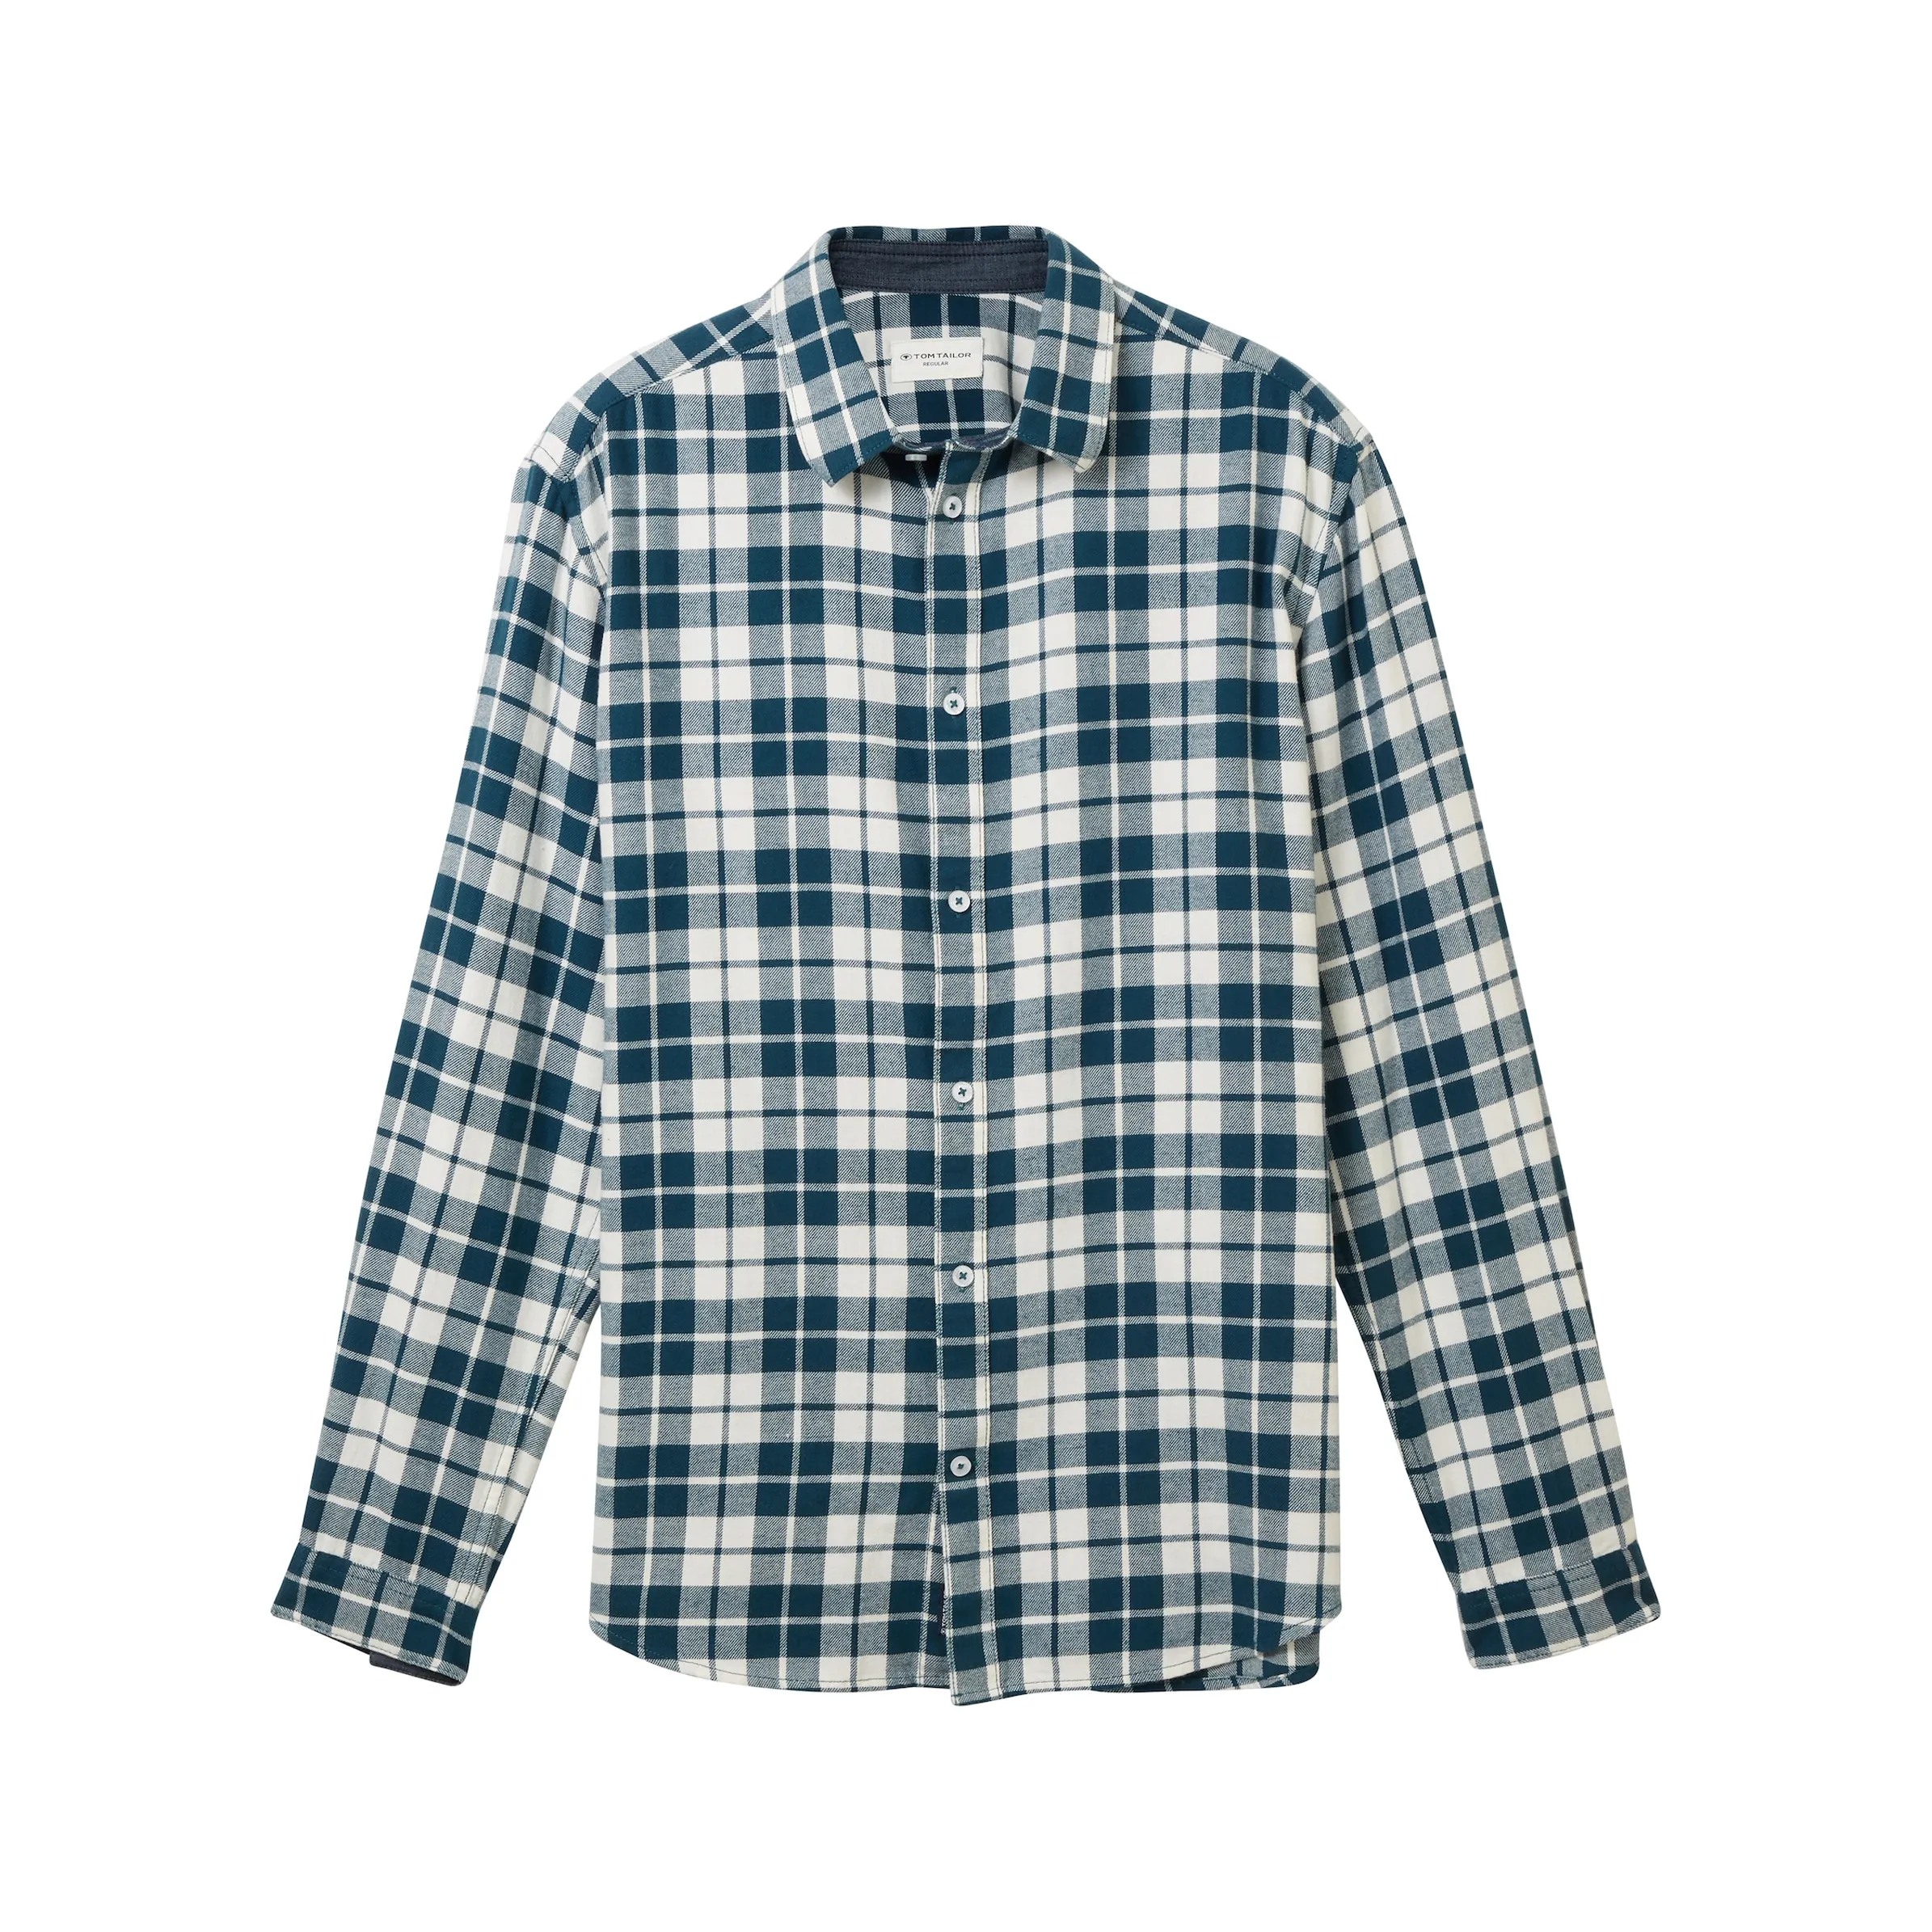 Tom Tailor 1038760 checked shirt Weiß 887480 33845 1